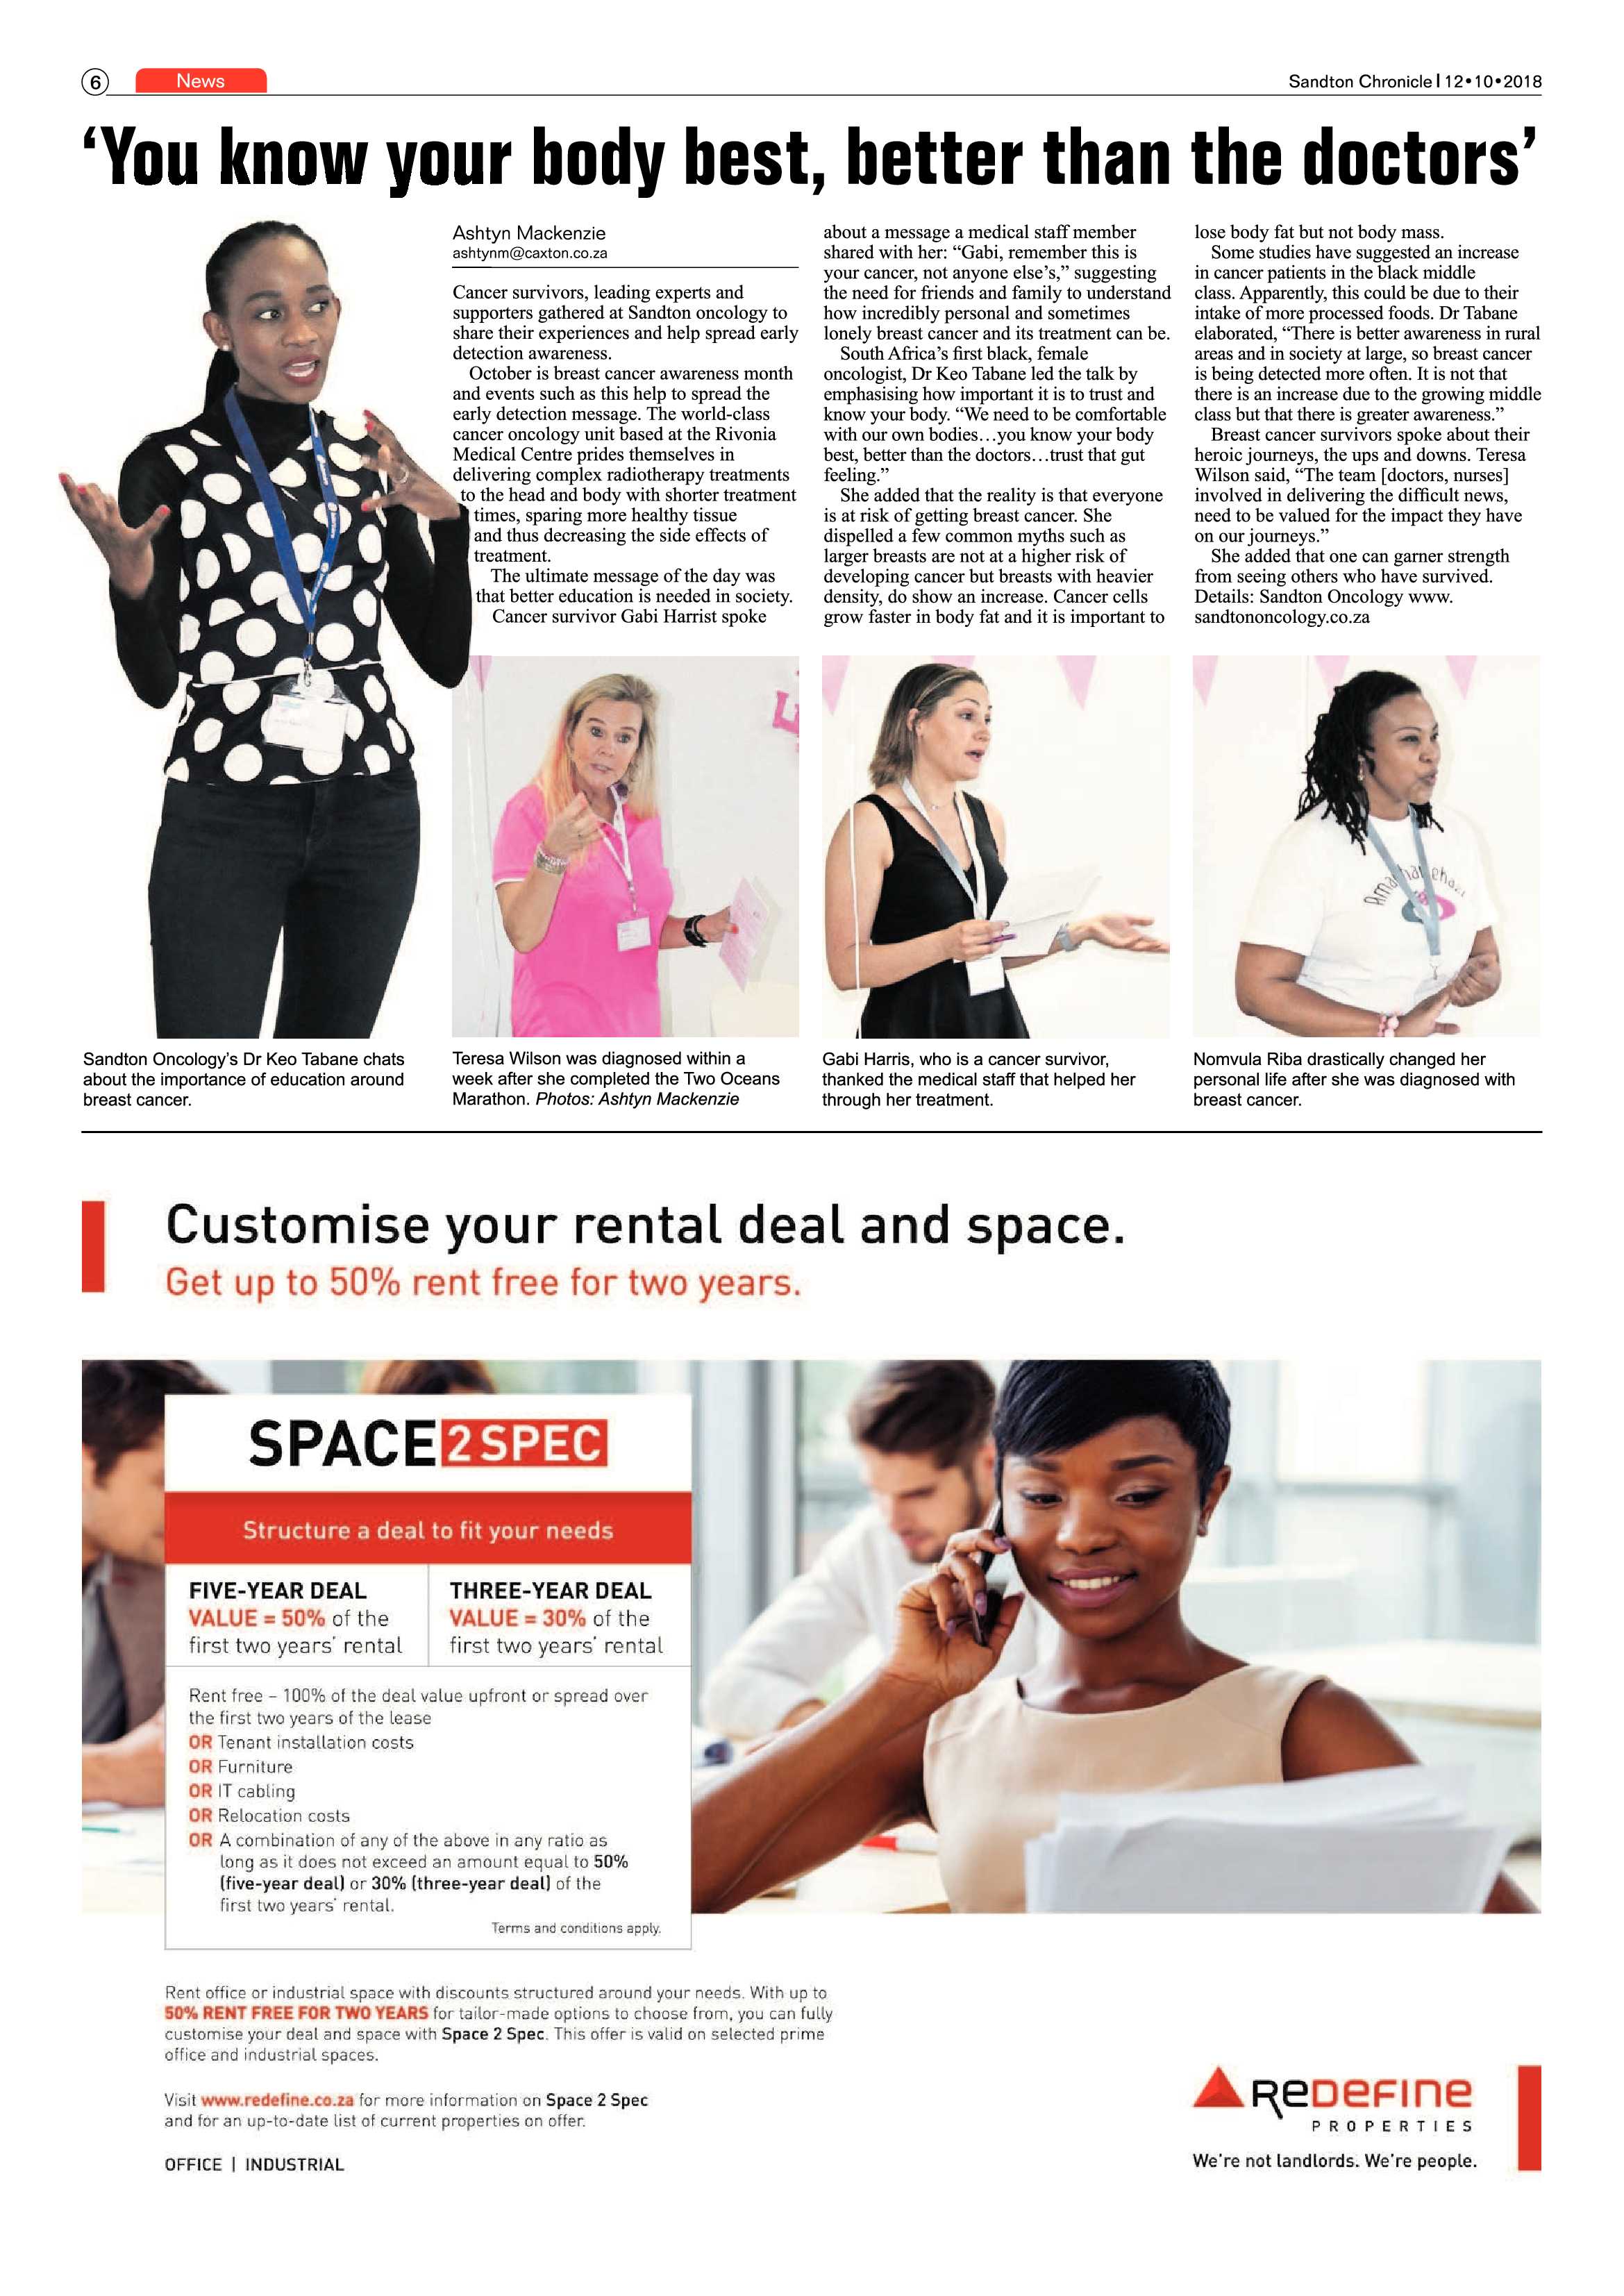 Sandton Chronicle 12 October 2018 page 6